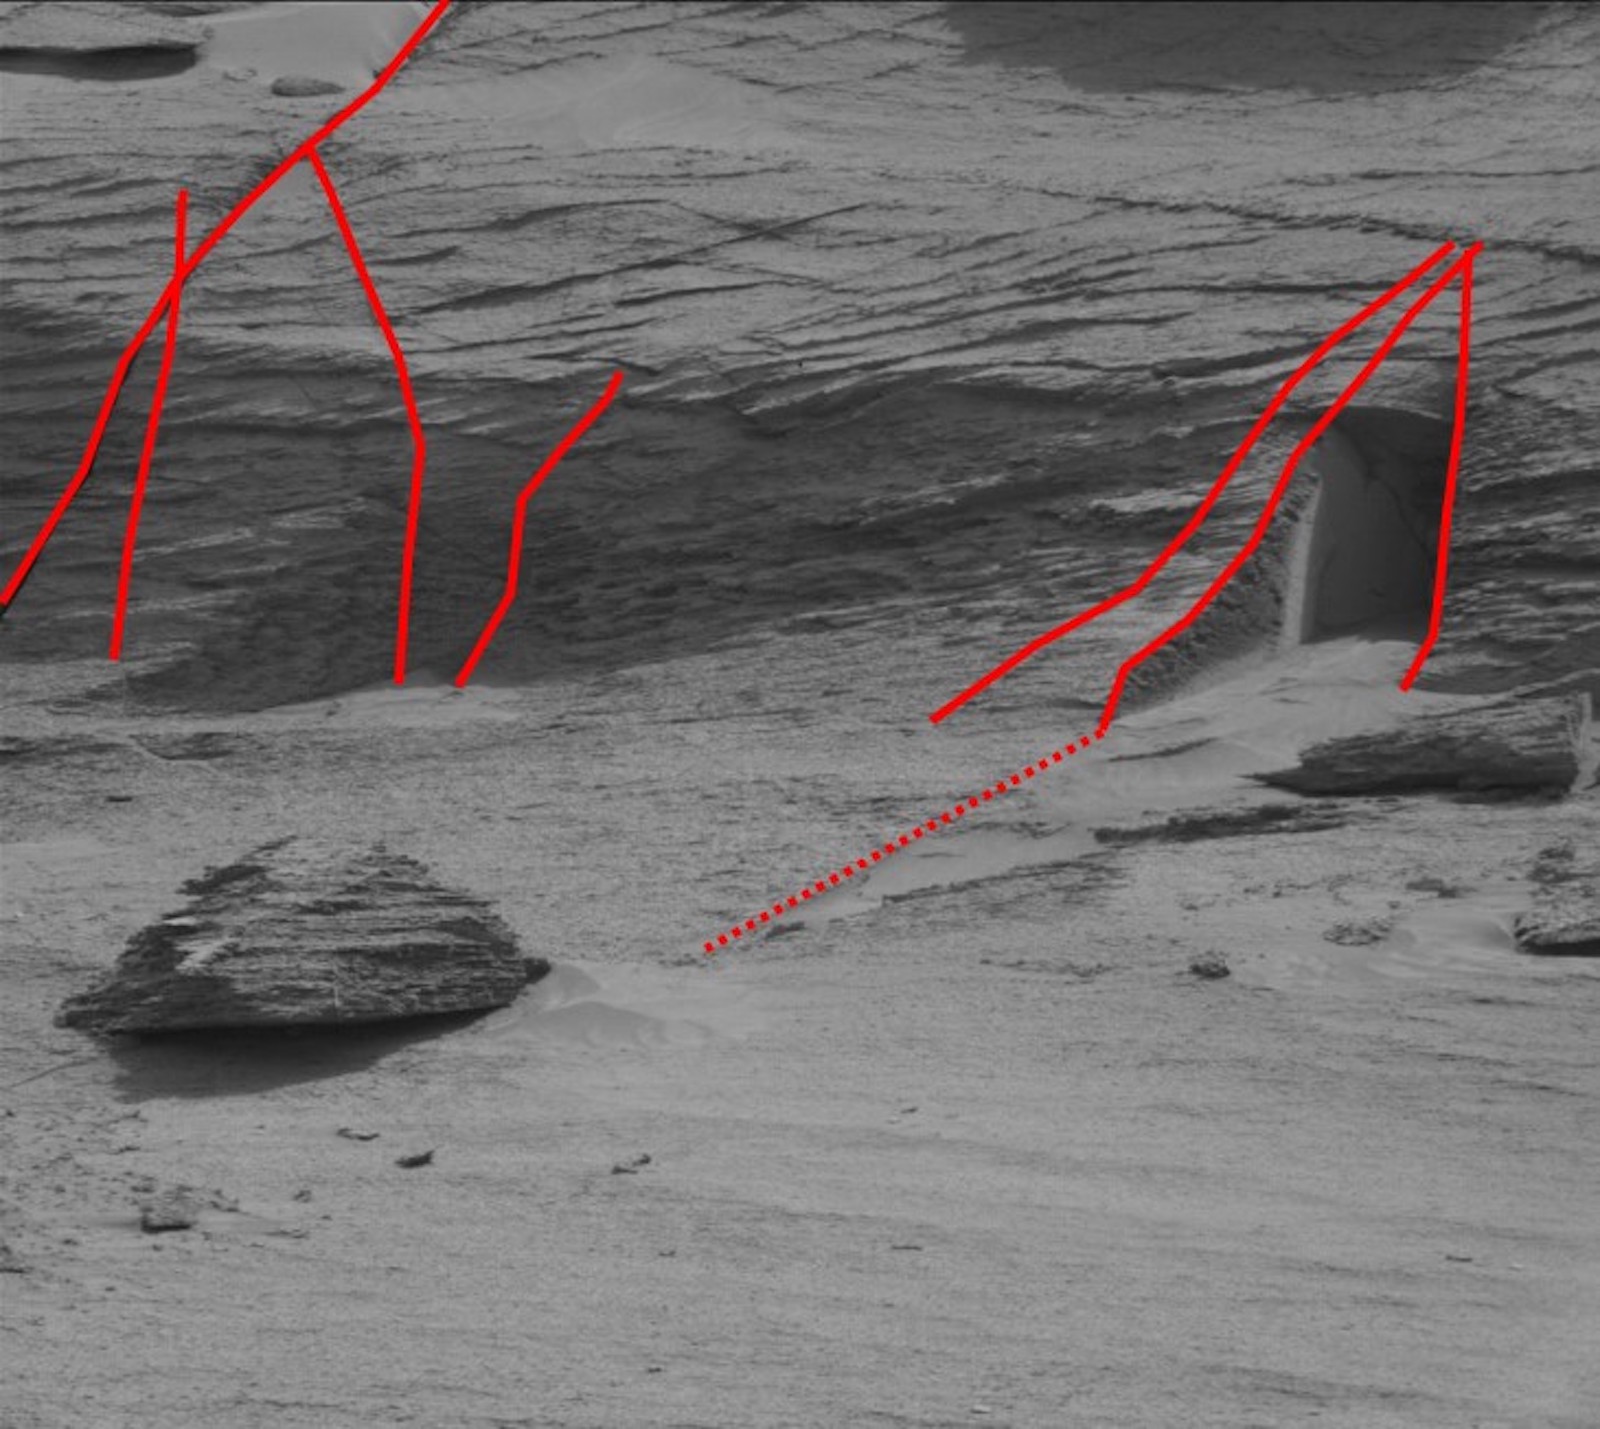 The raw image with red lines added to show some of the joints.